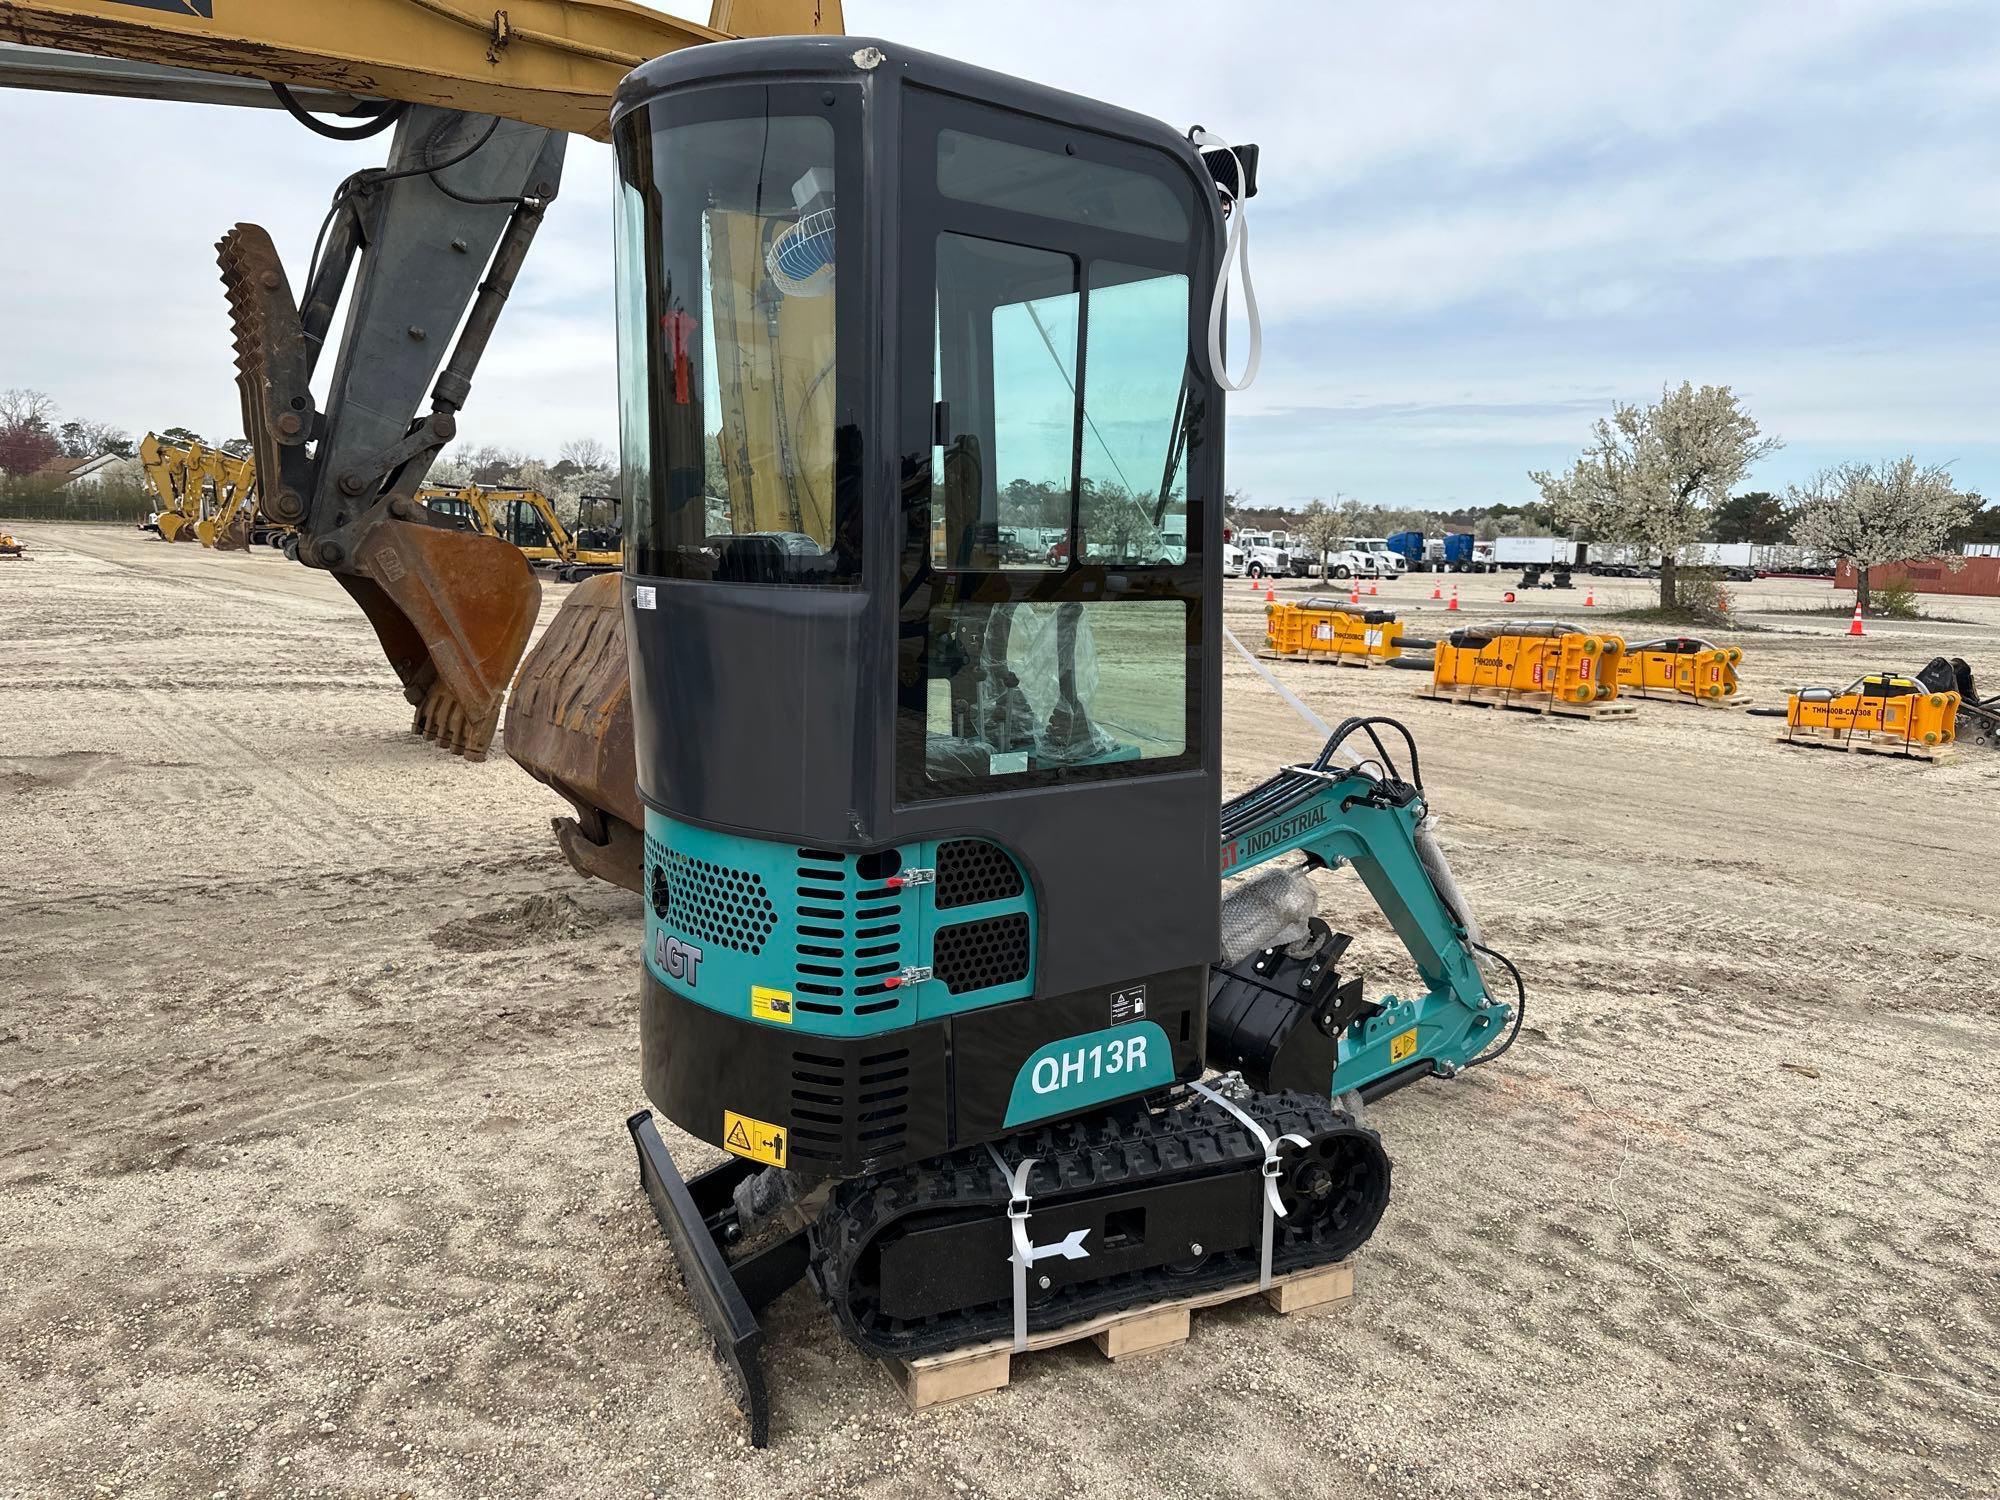 NEW AGT QH13R HYDRAULIC EXCAVATOR SN-1028741 powered by Briggs & Stratton gas engine, equipped with